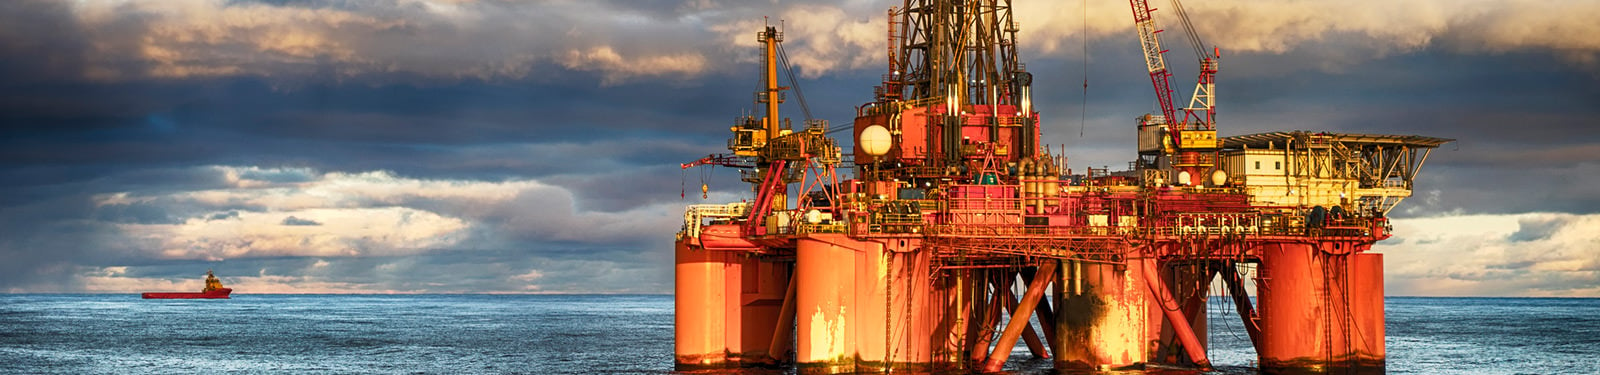 Offshore Oil & Gas Production